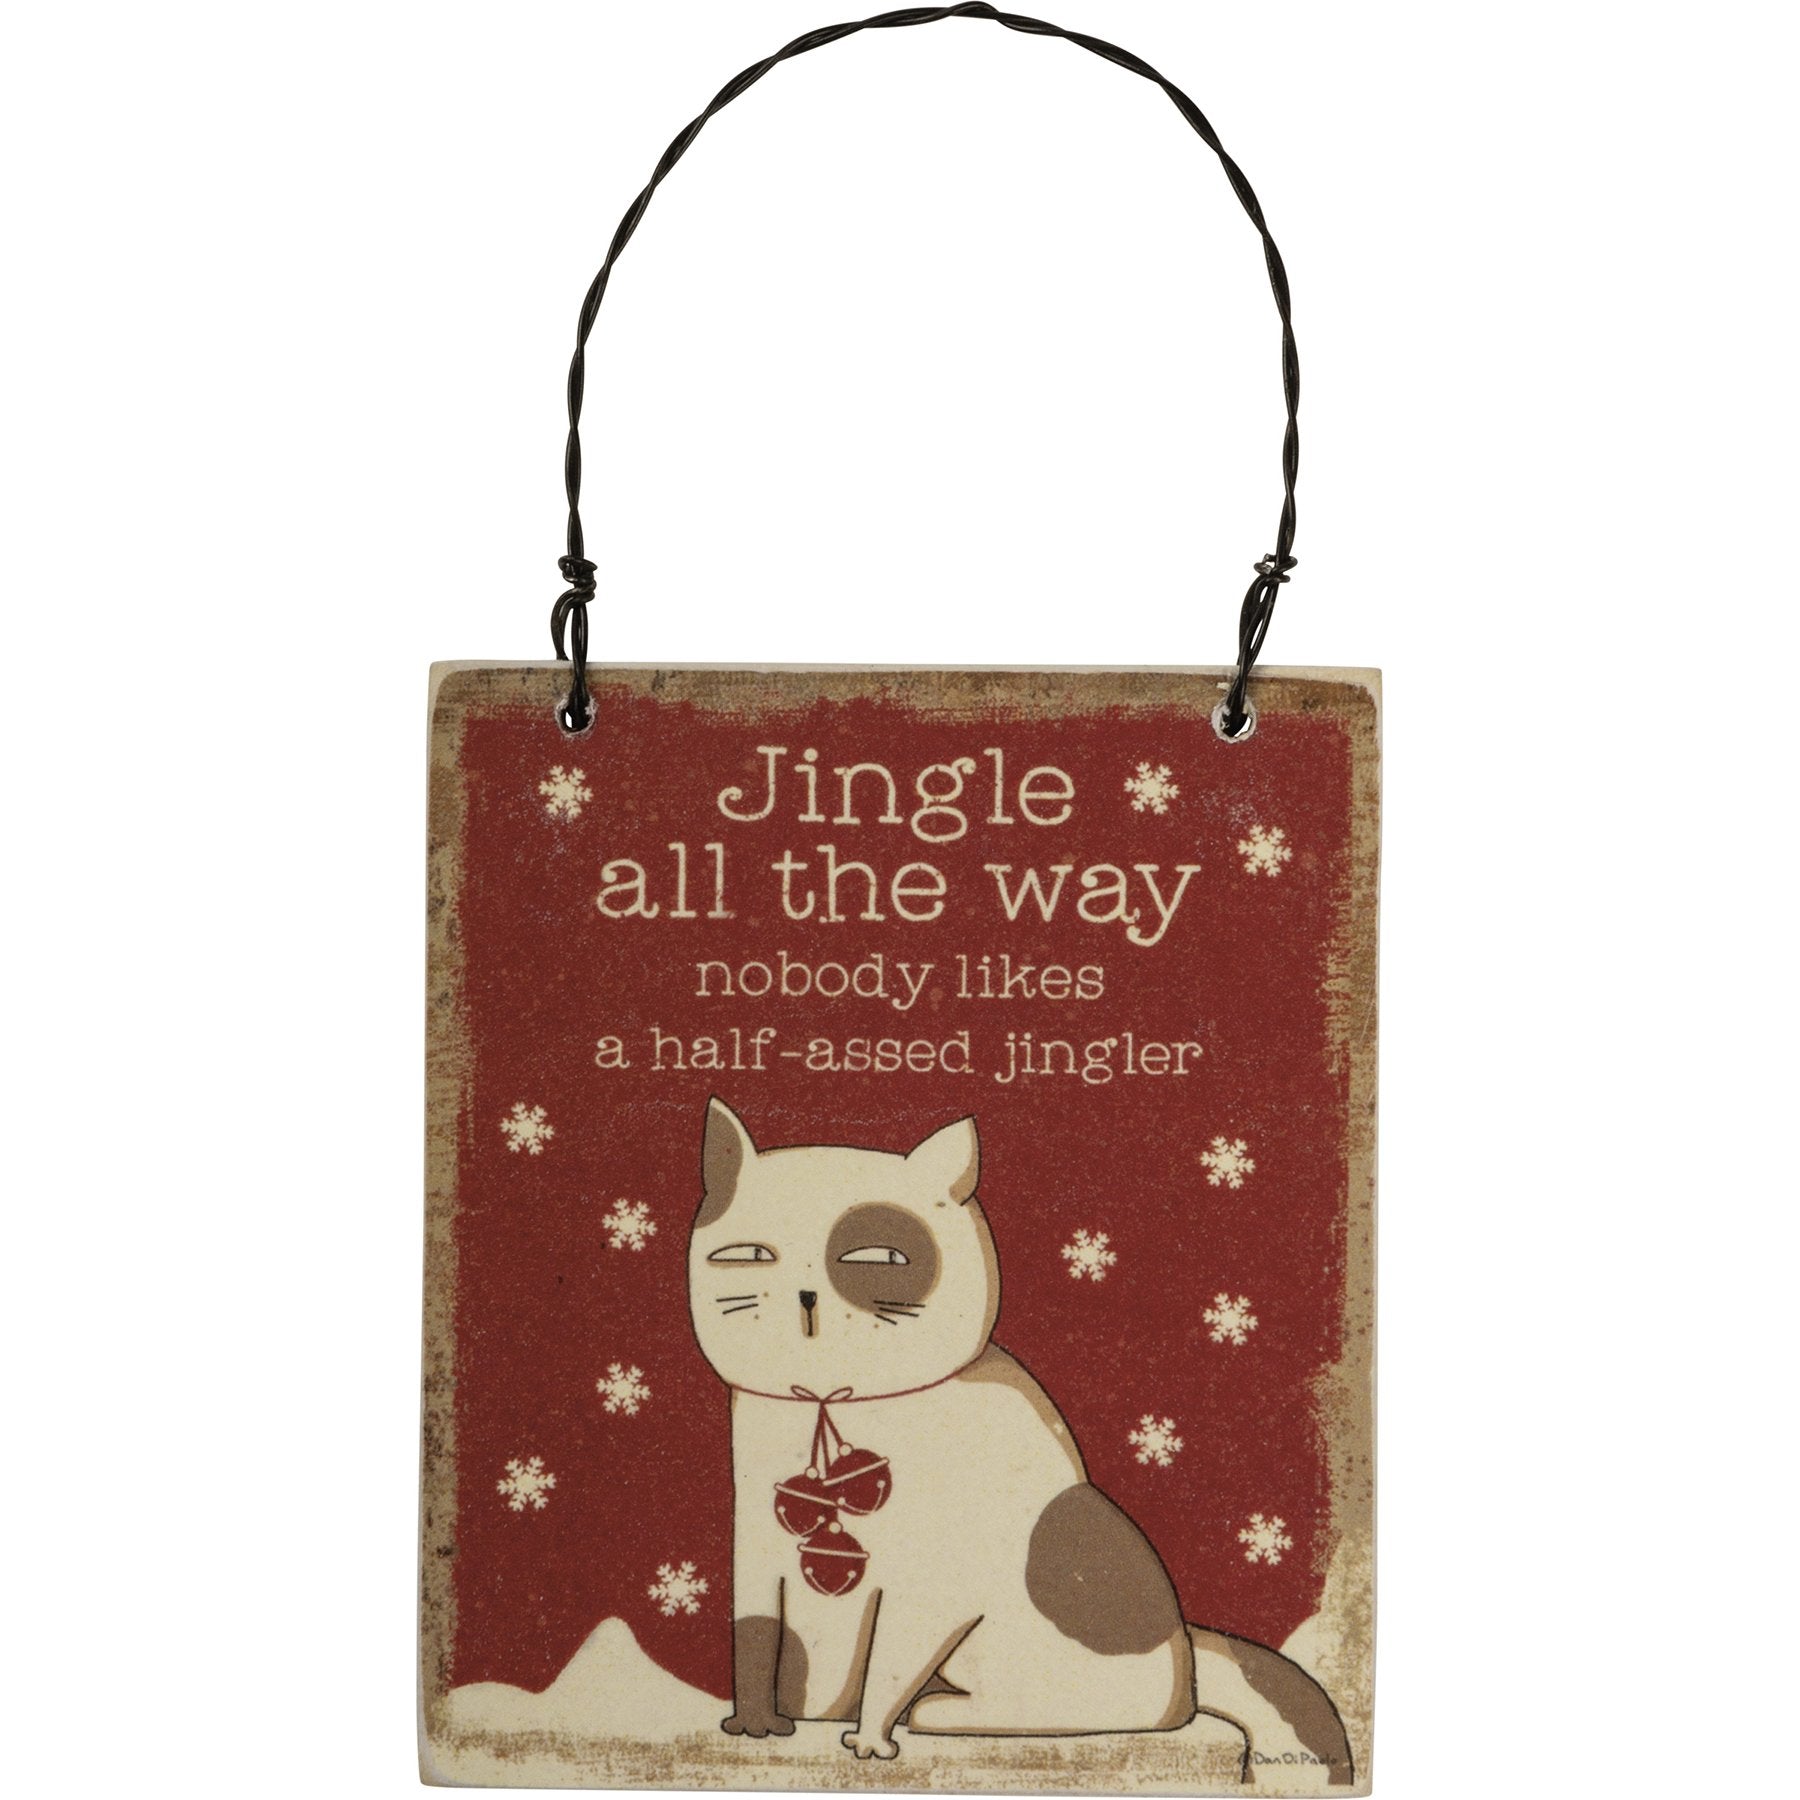 Christmas Decor For Cat Lovers, Jingle All The Way Nobody Likes A Half-Assed Jingler Cat Christmas Tree Ornament